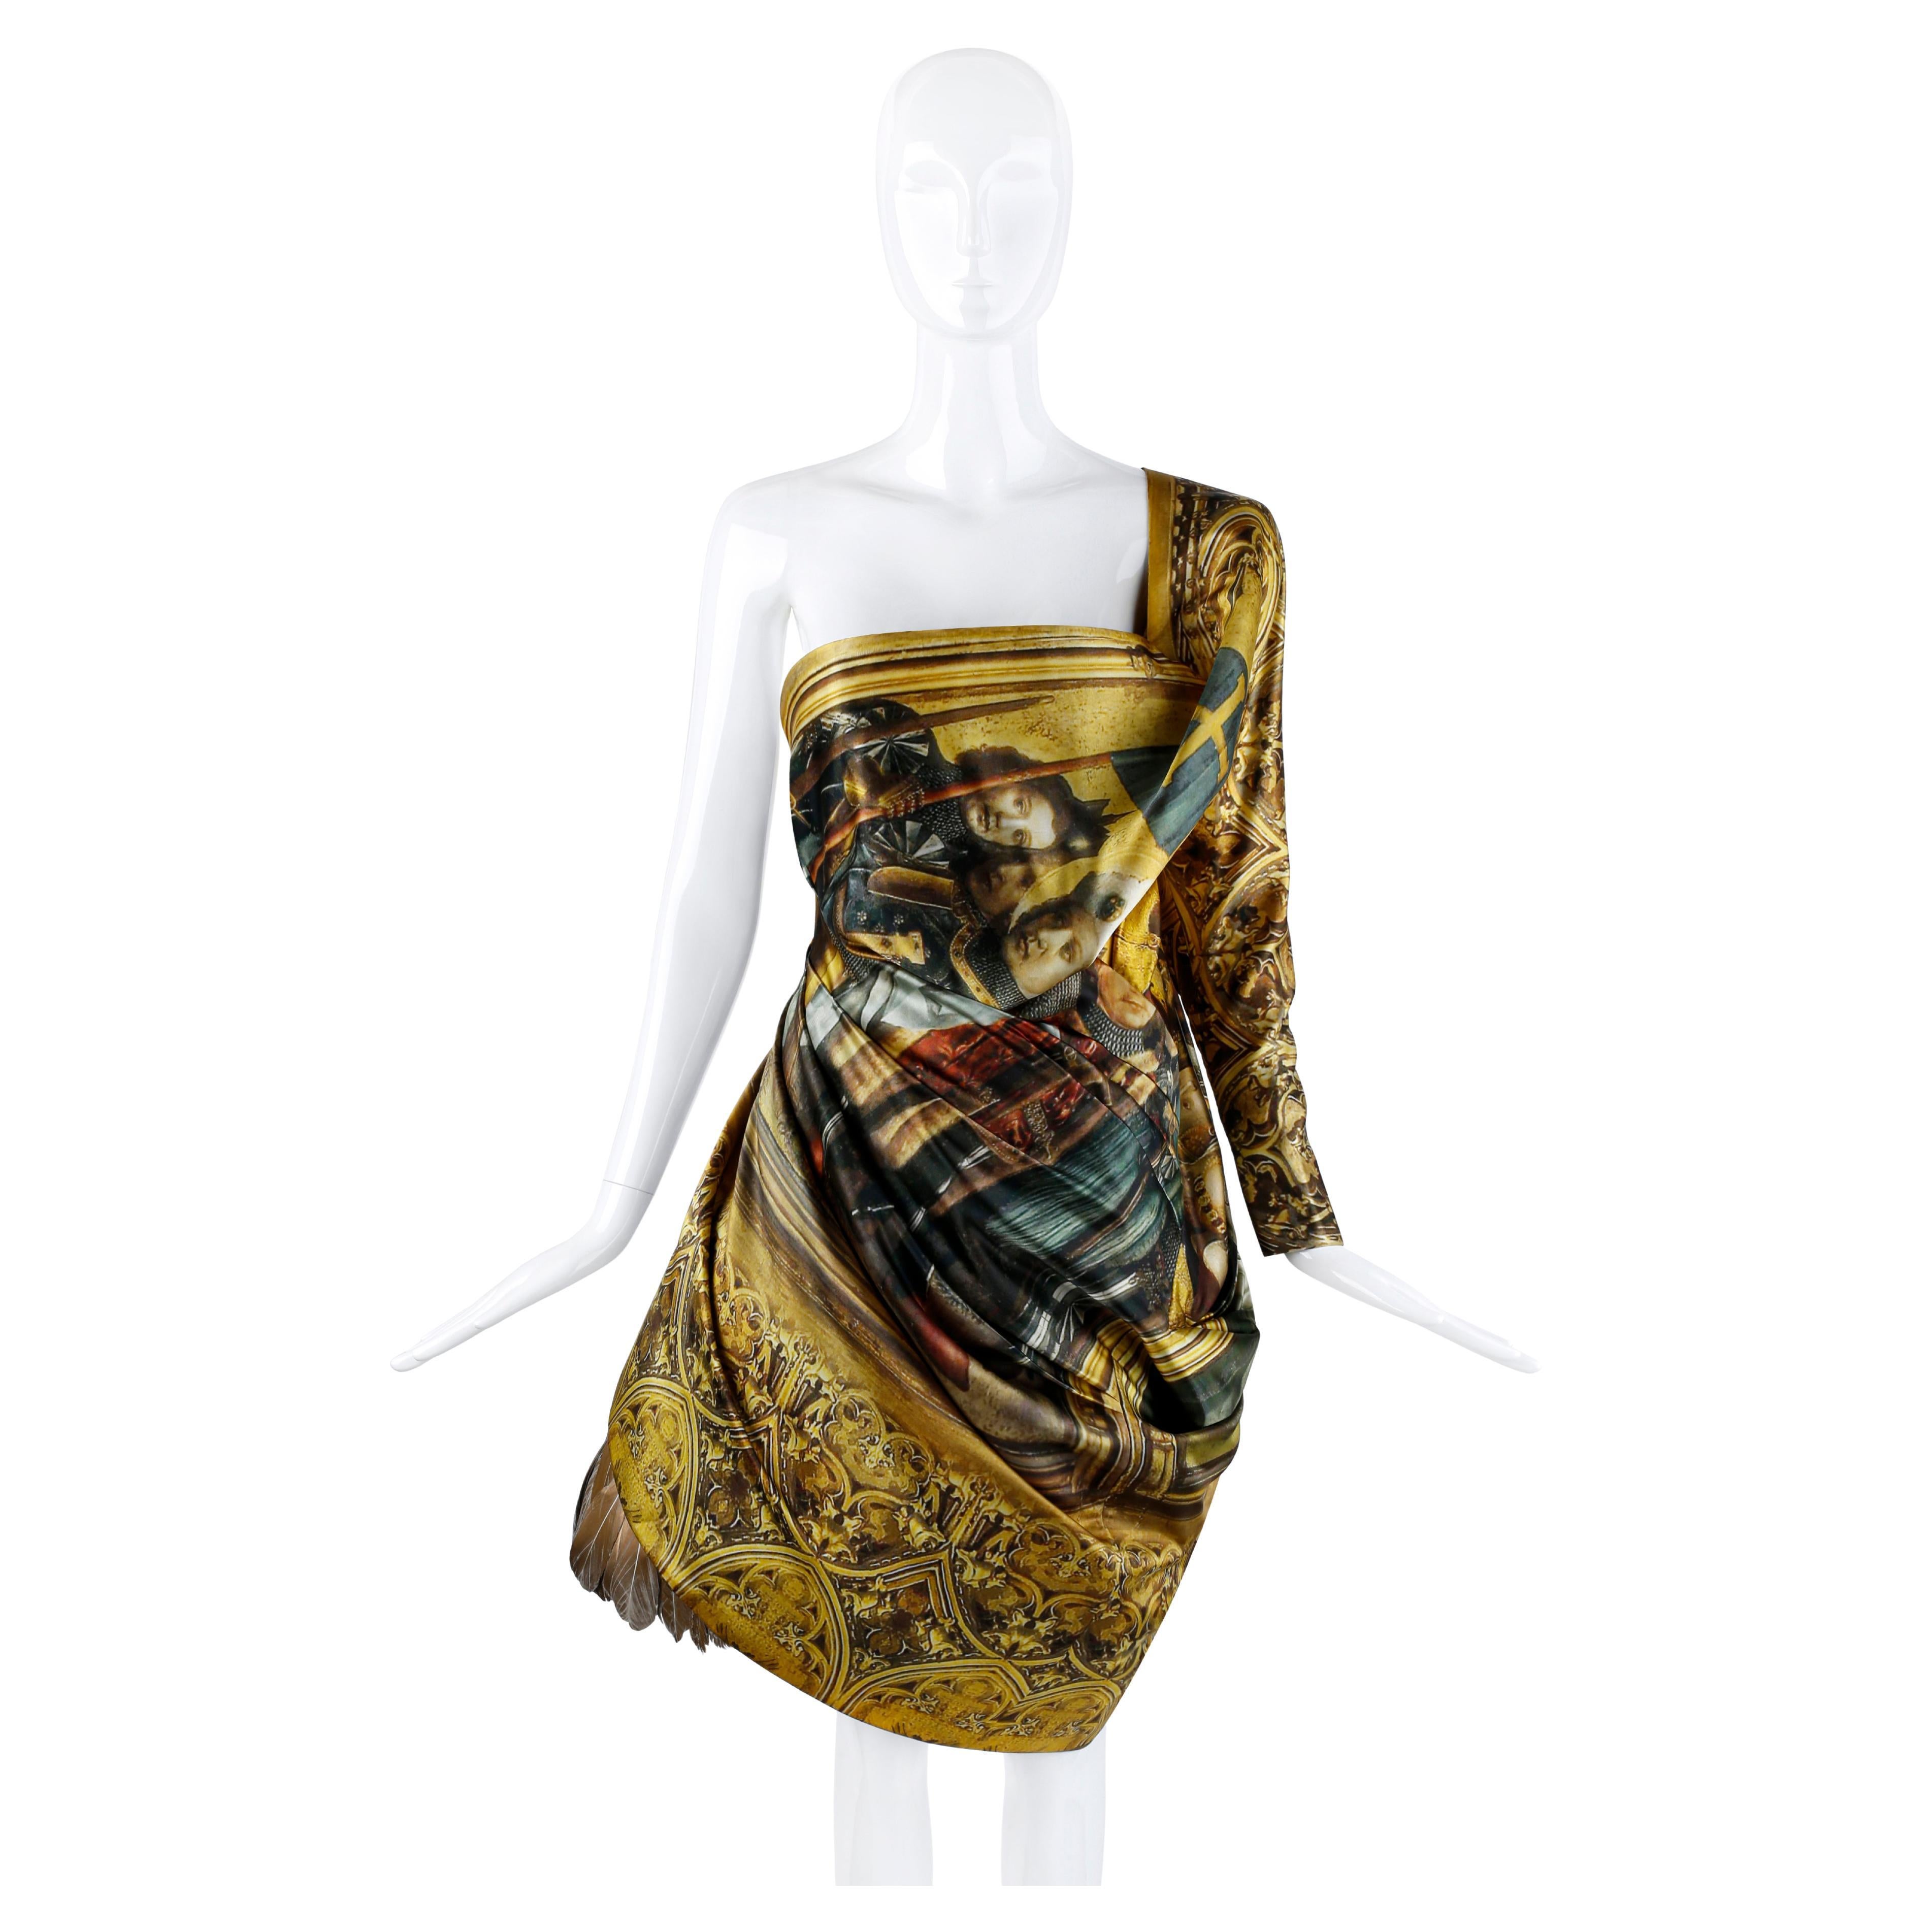 Alexander McQueen F/W 2010 “Angels & Demons” Medieval Art Royalty Gown Dress For Sale